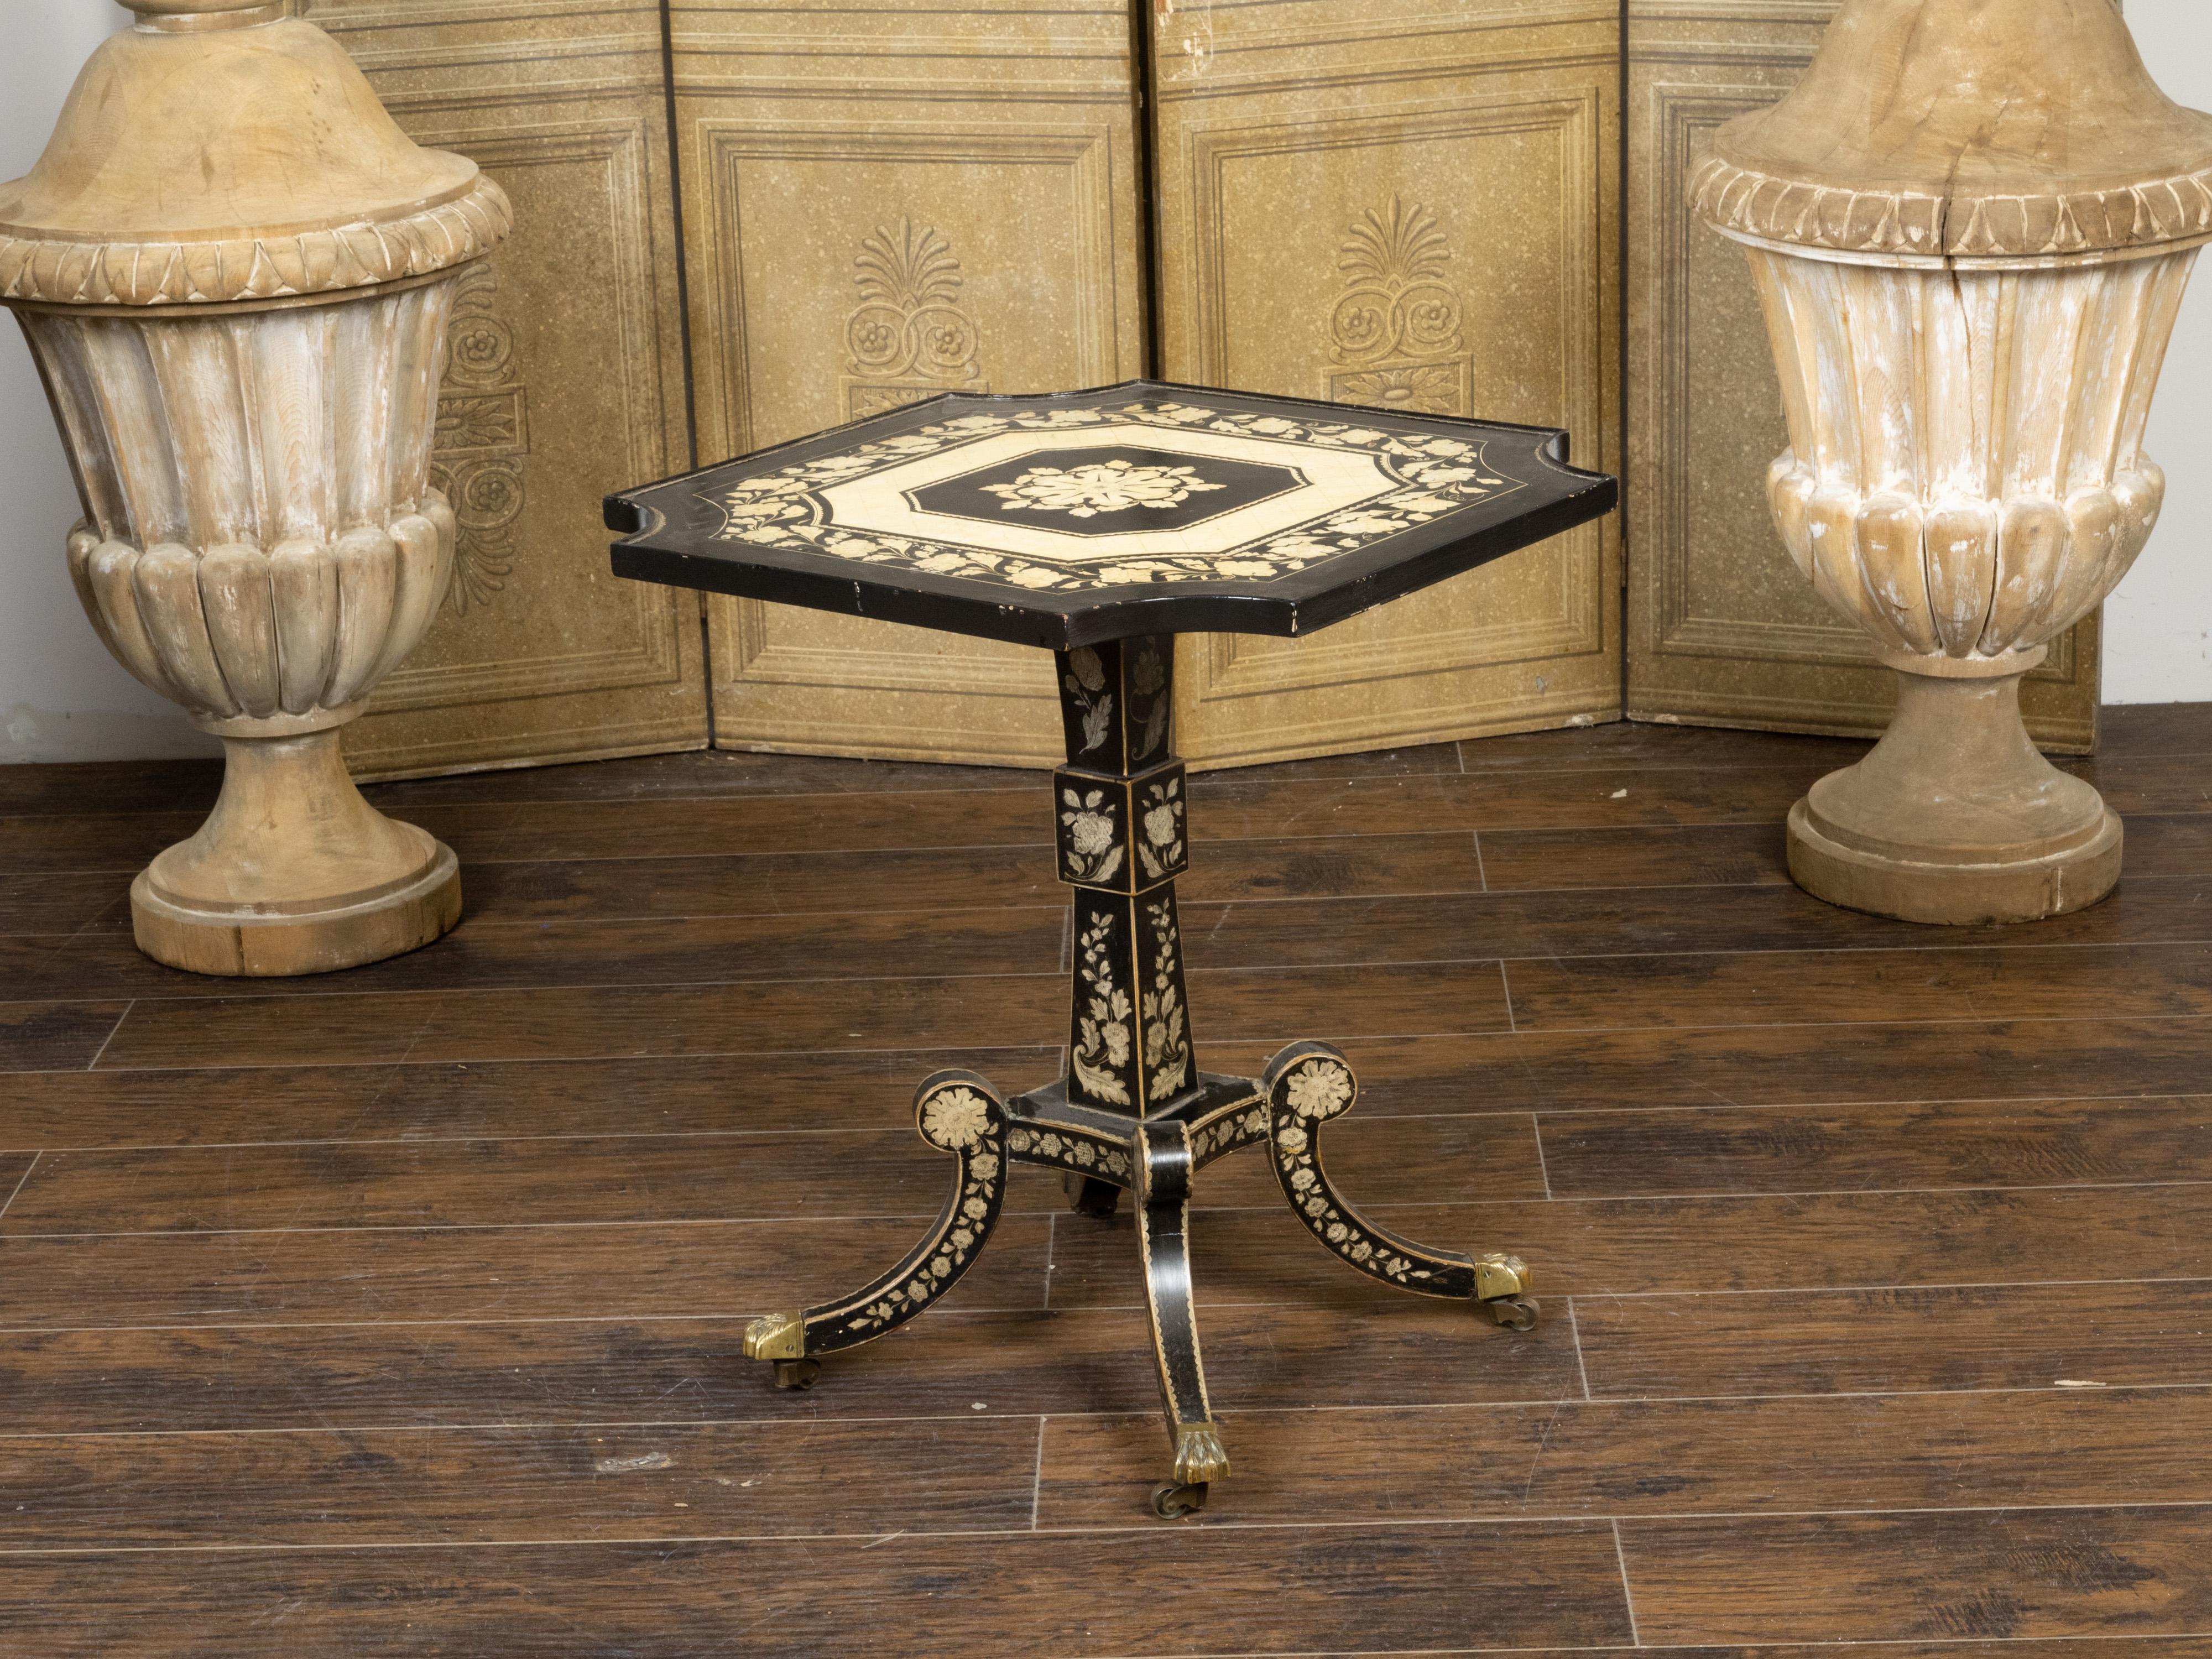 Japanned English Regency Penwork Occasional Table with Floral Décor and Curving Legs For Sale